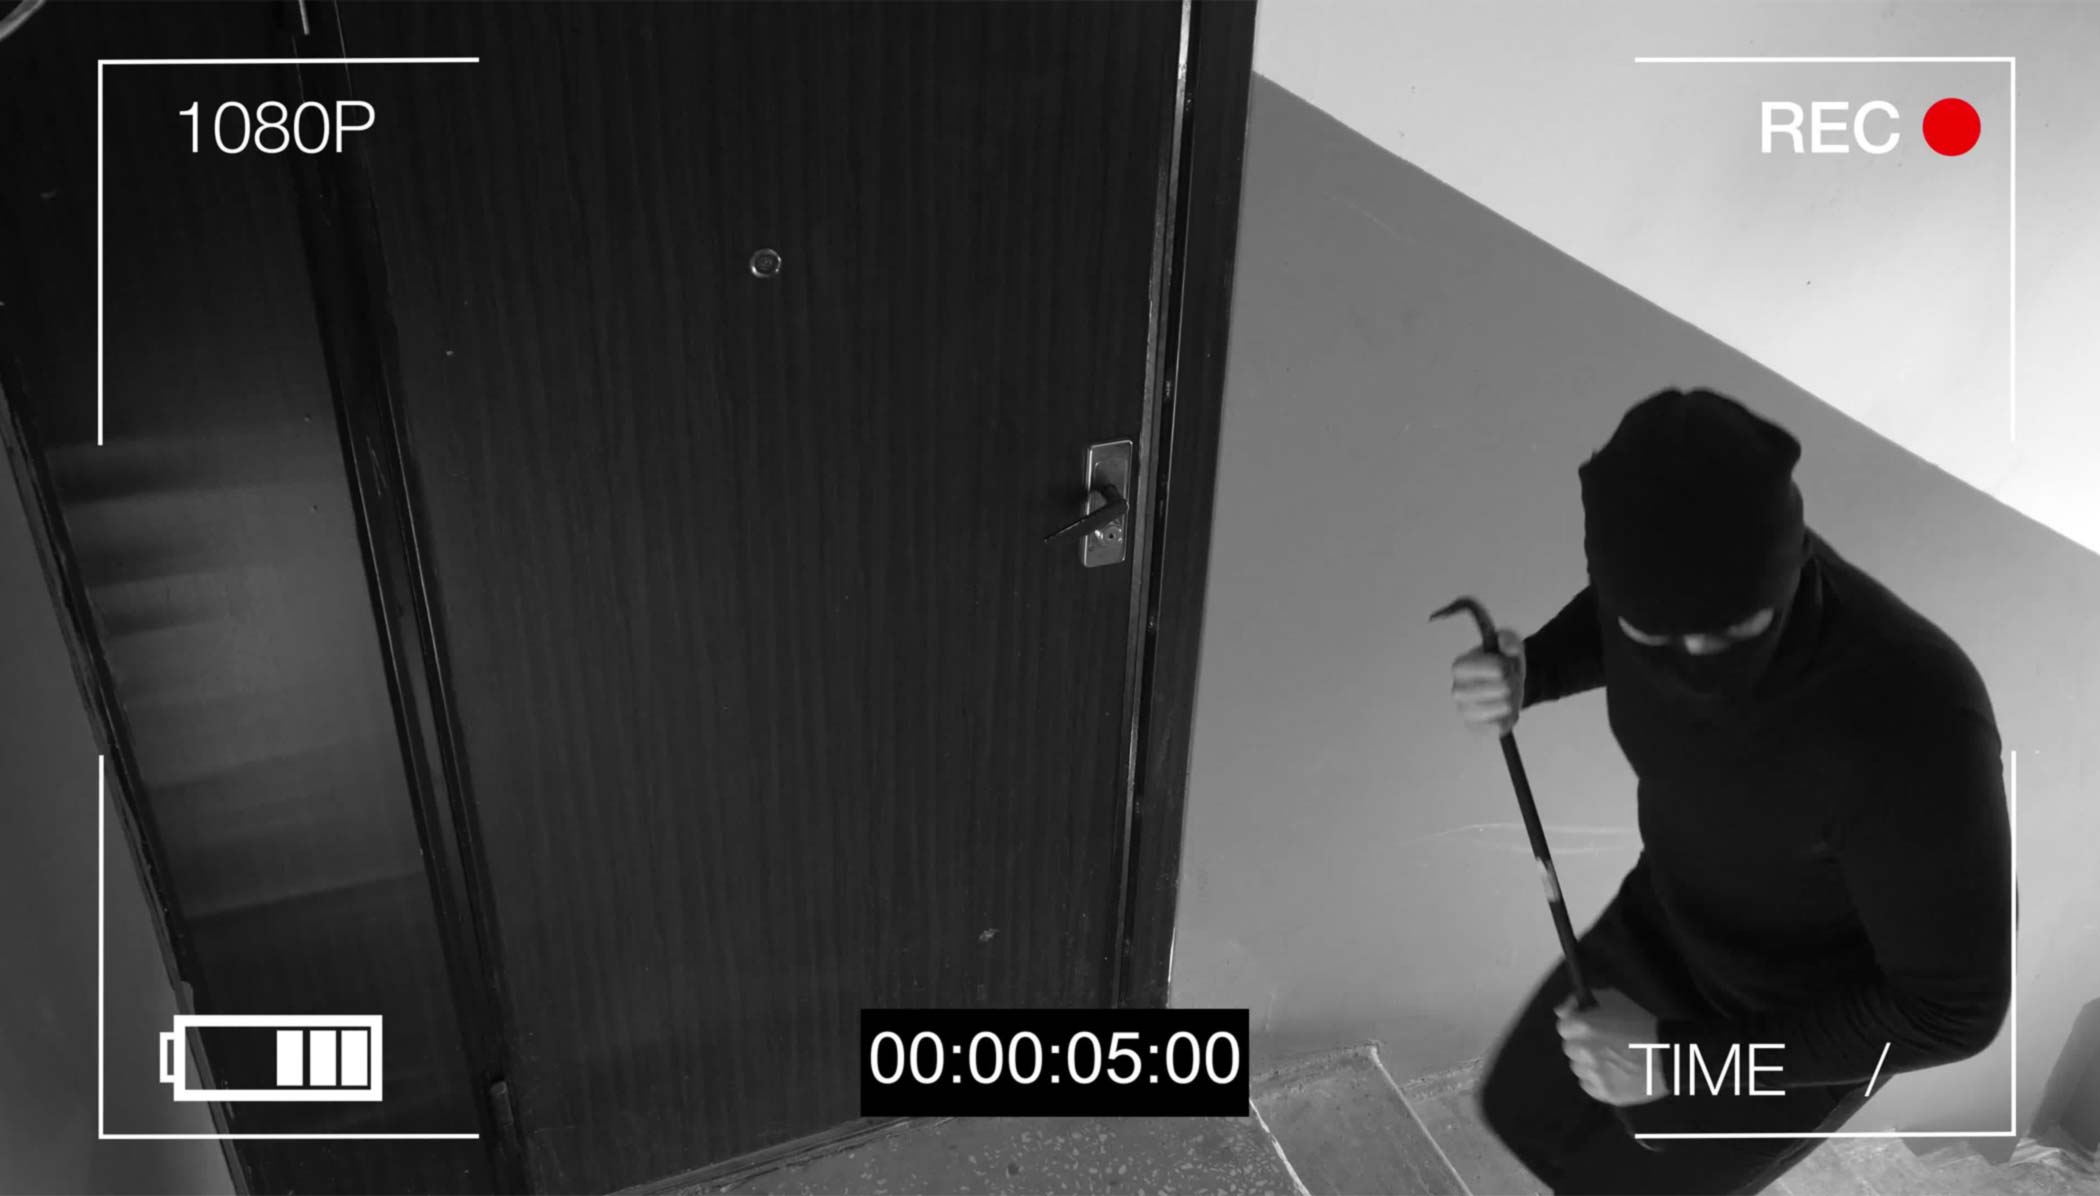 Hacker entry into business area caught on security camera